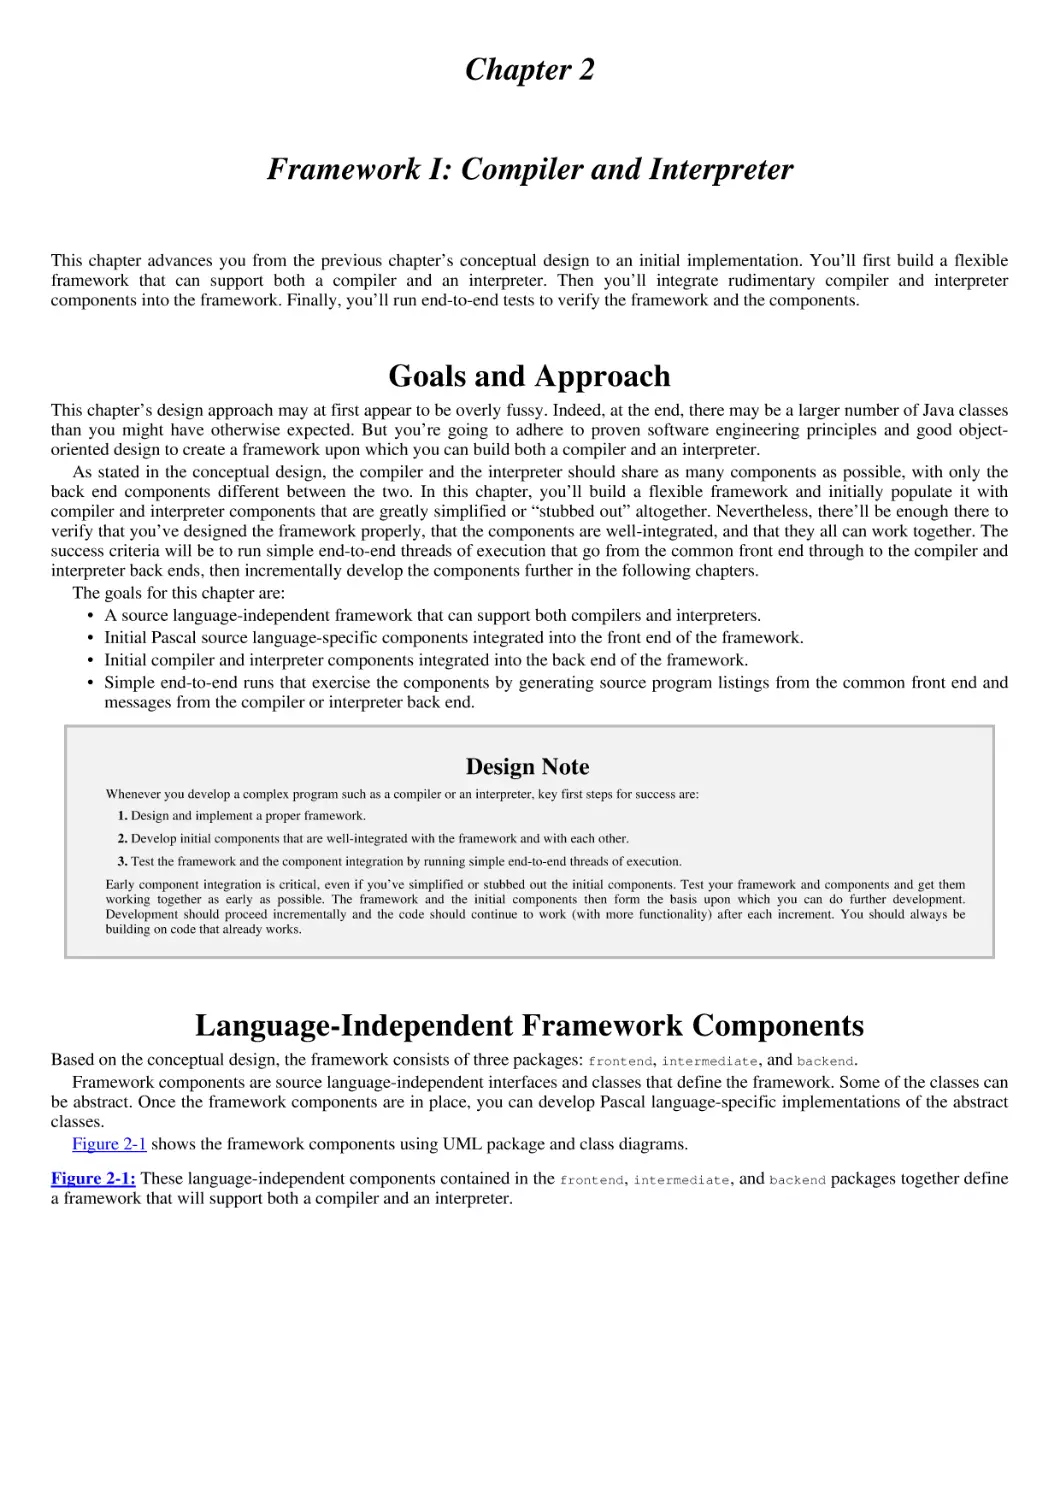 Chapter 2
Goals and Approach
Language-Independent Framework Components